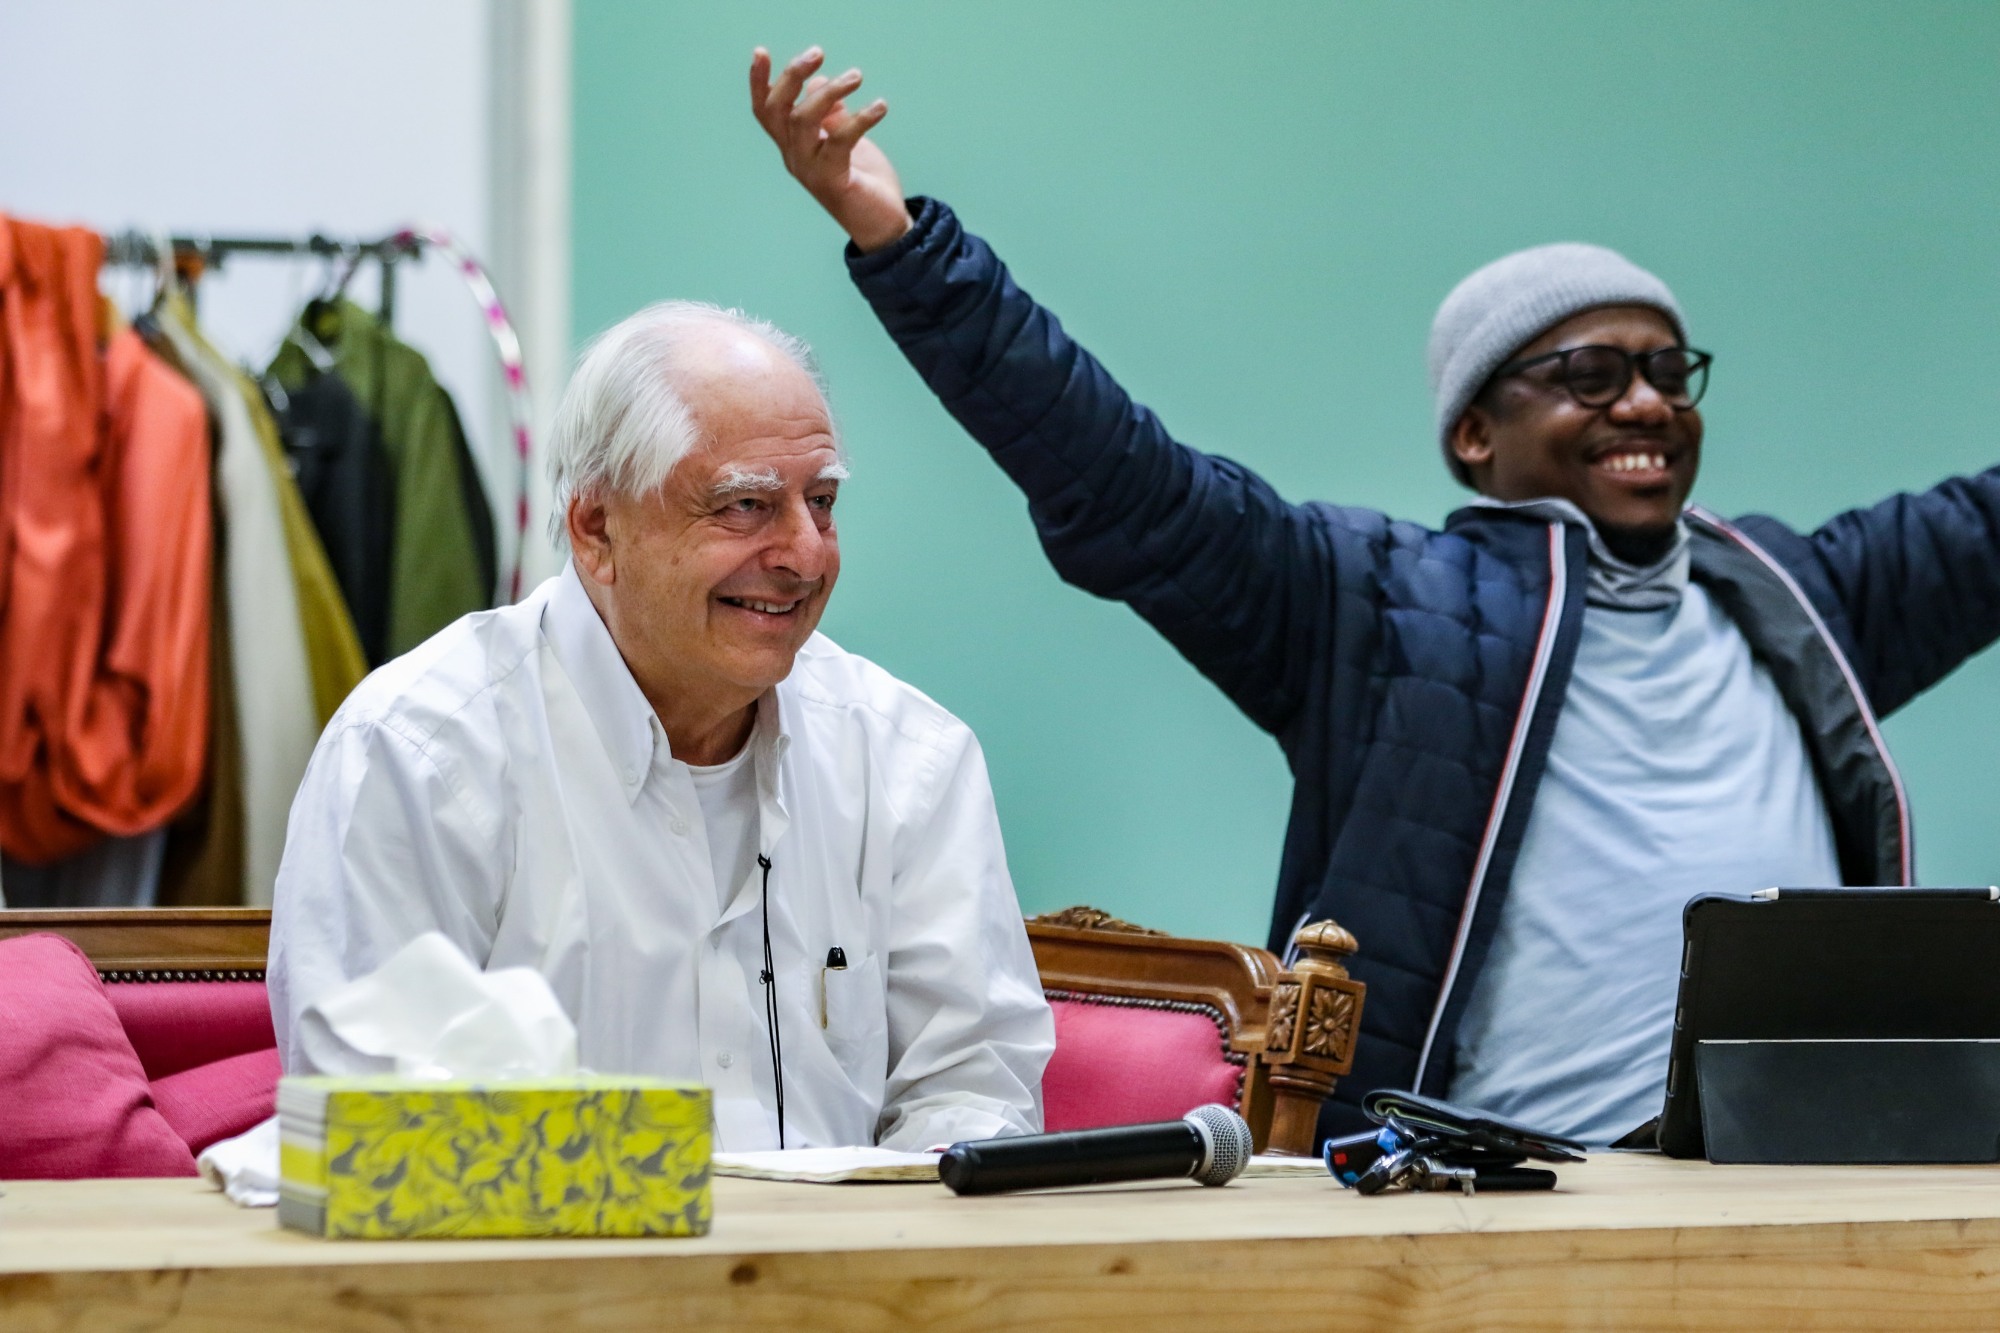 William Kentridge and a collaborator from The Centre for the Less Good Idea